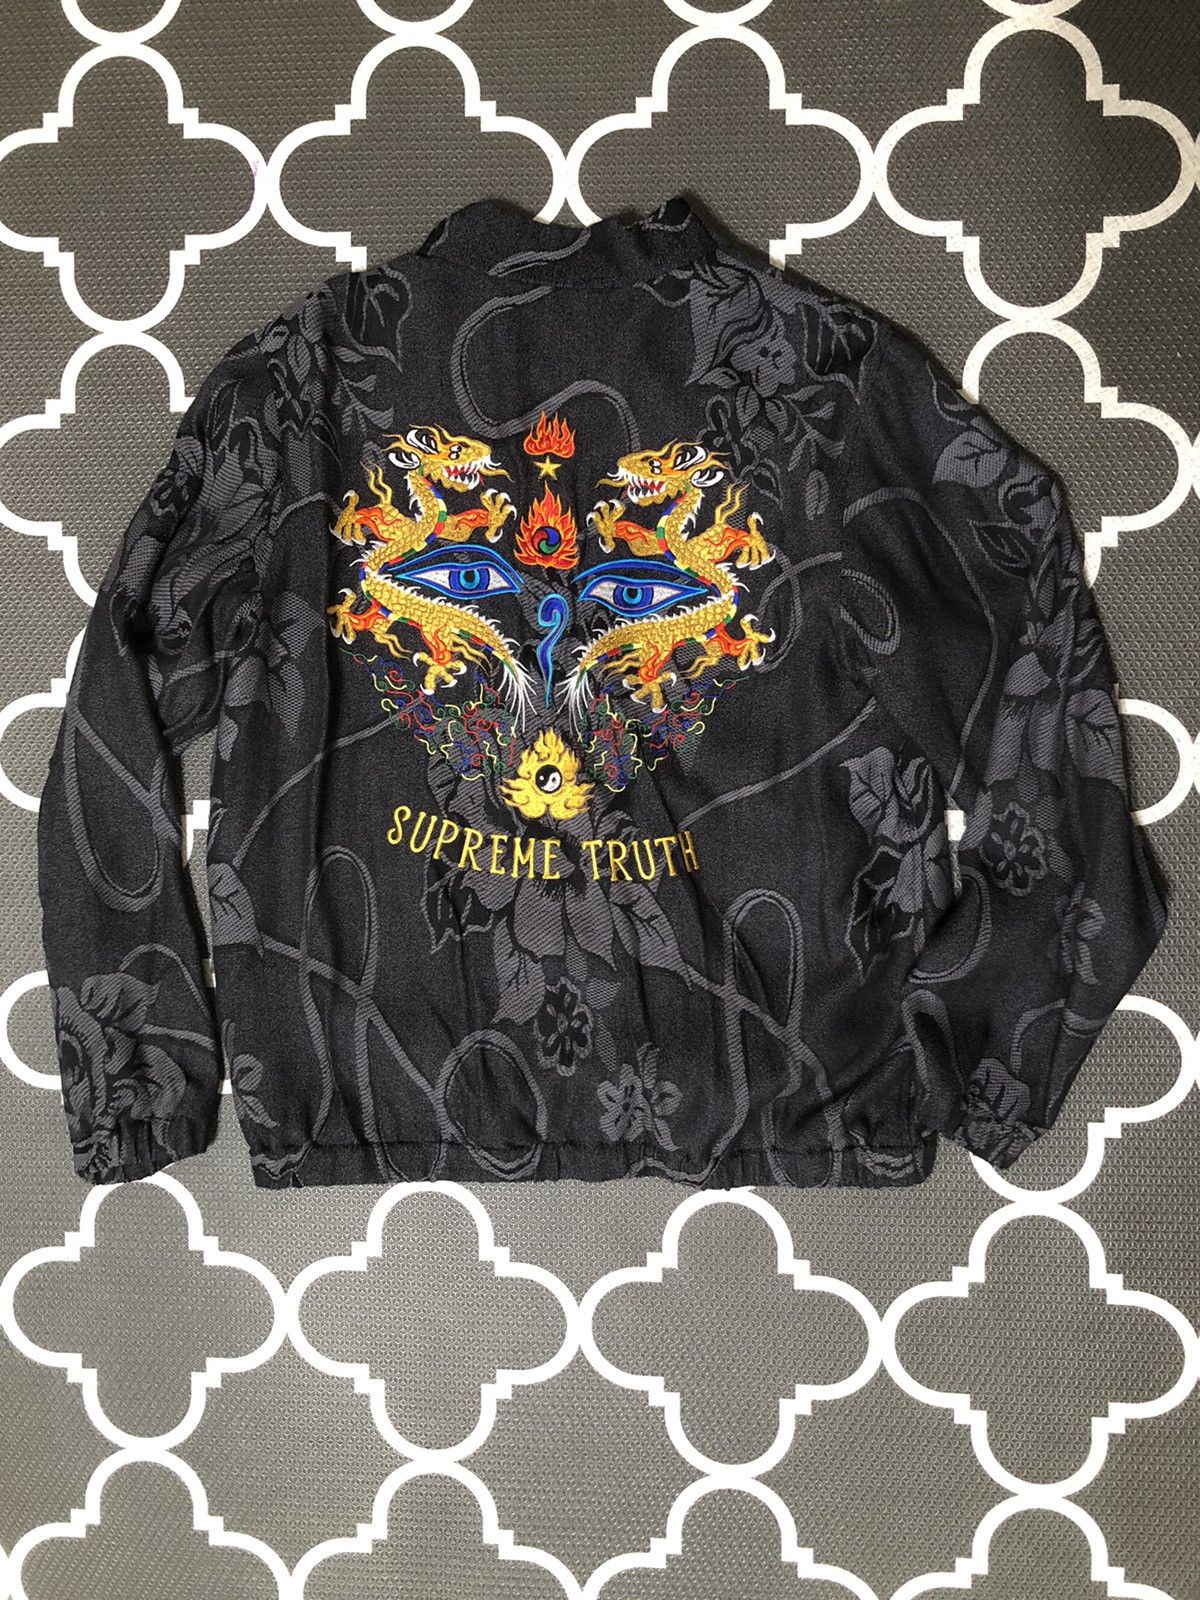 Supreme Truth Tour Jacket | Grailed